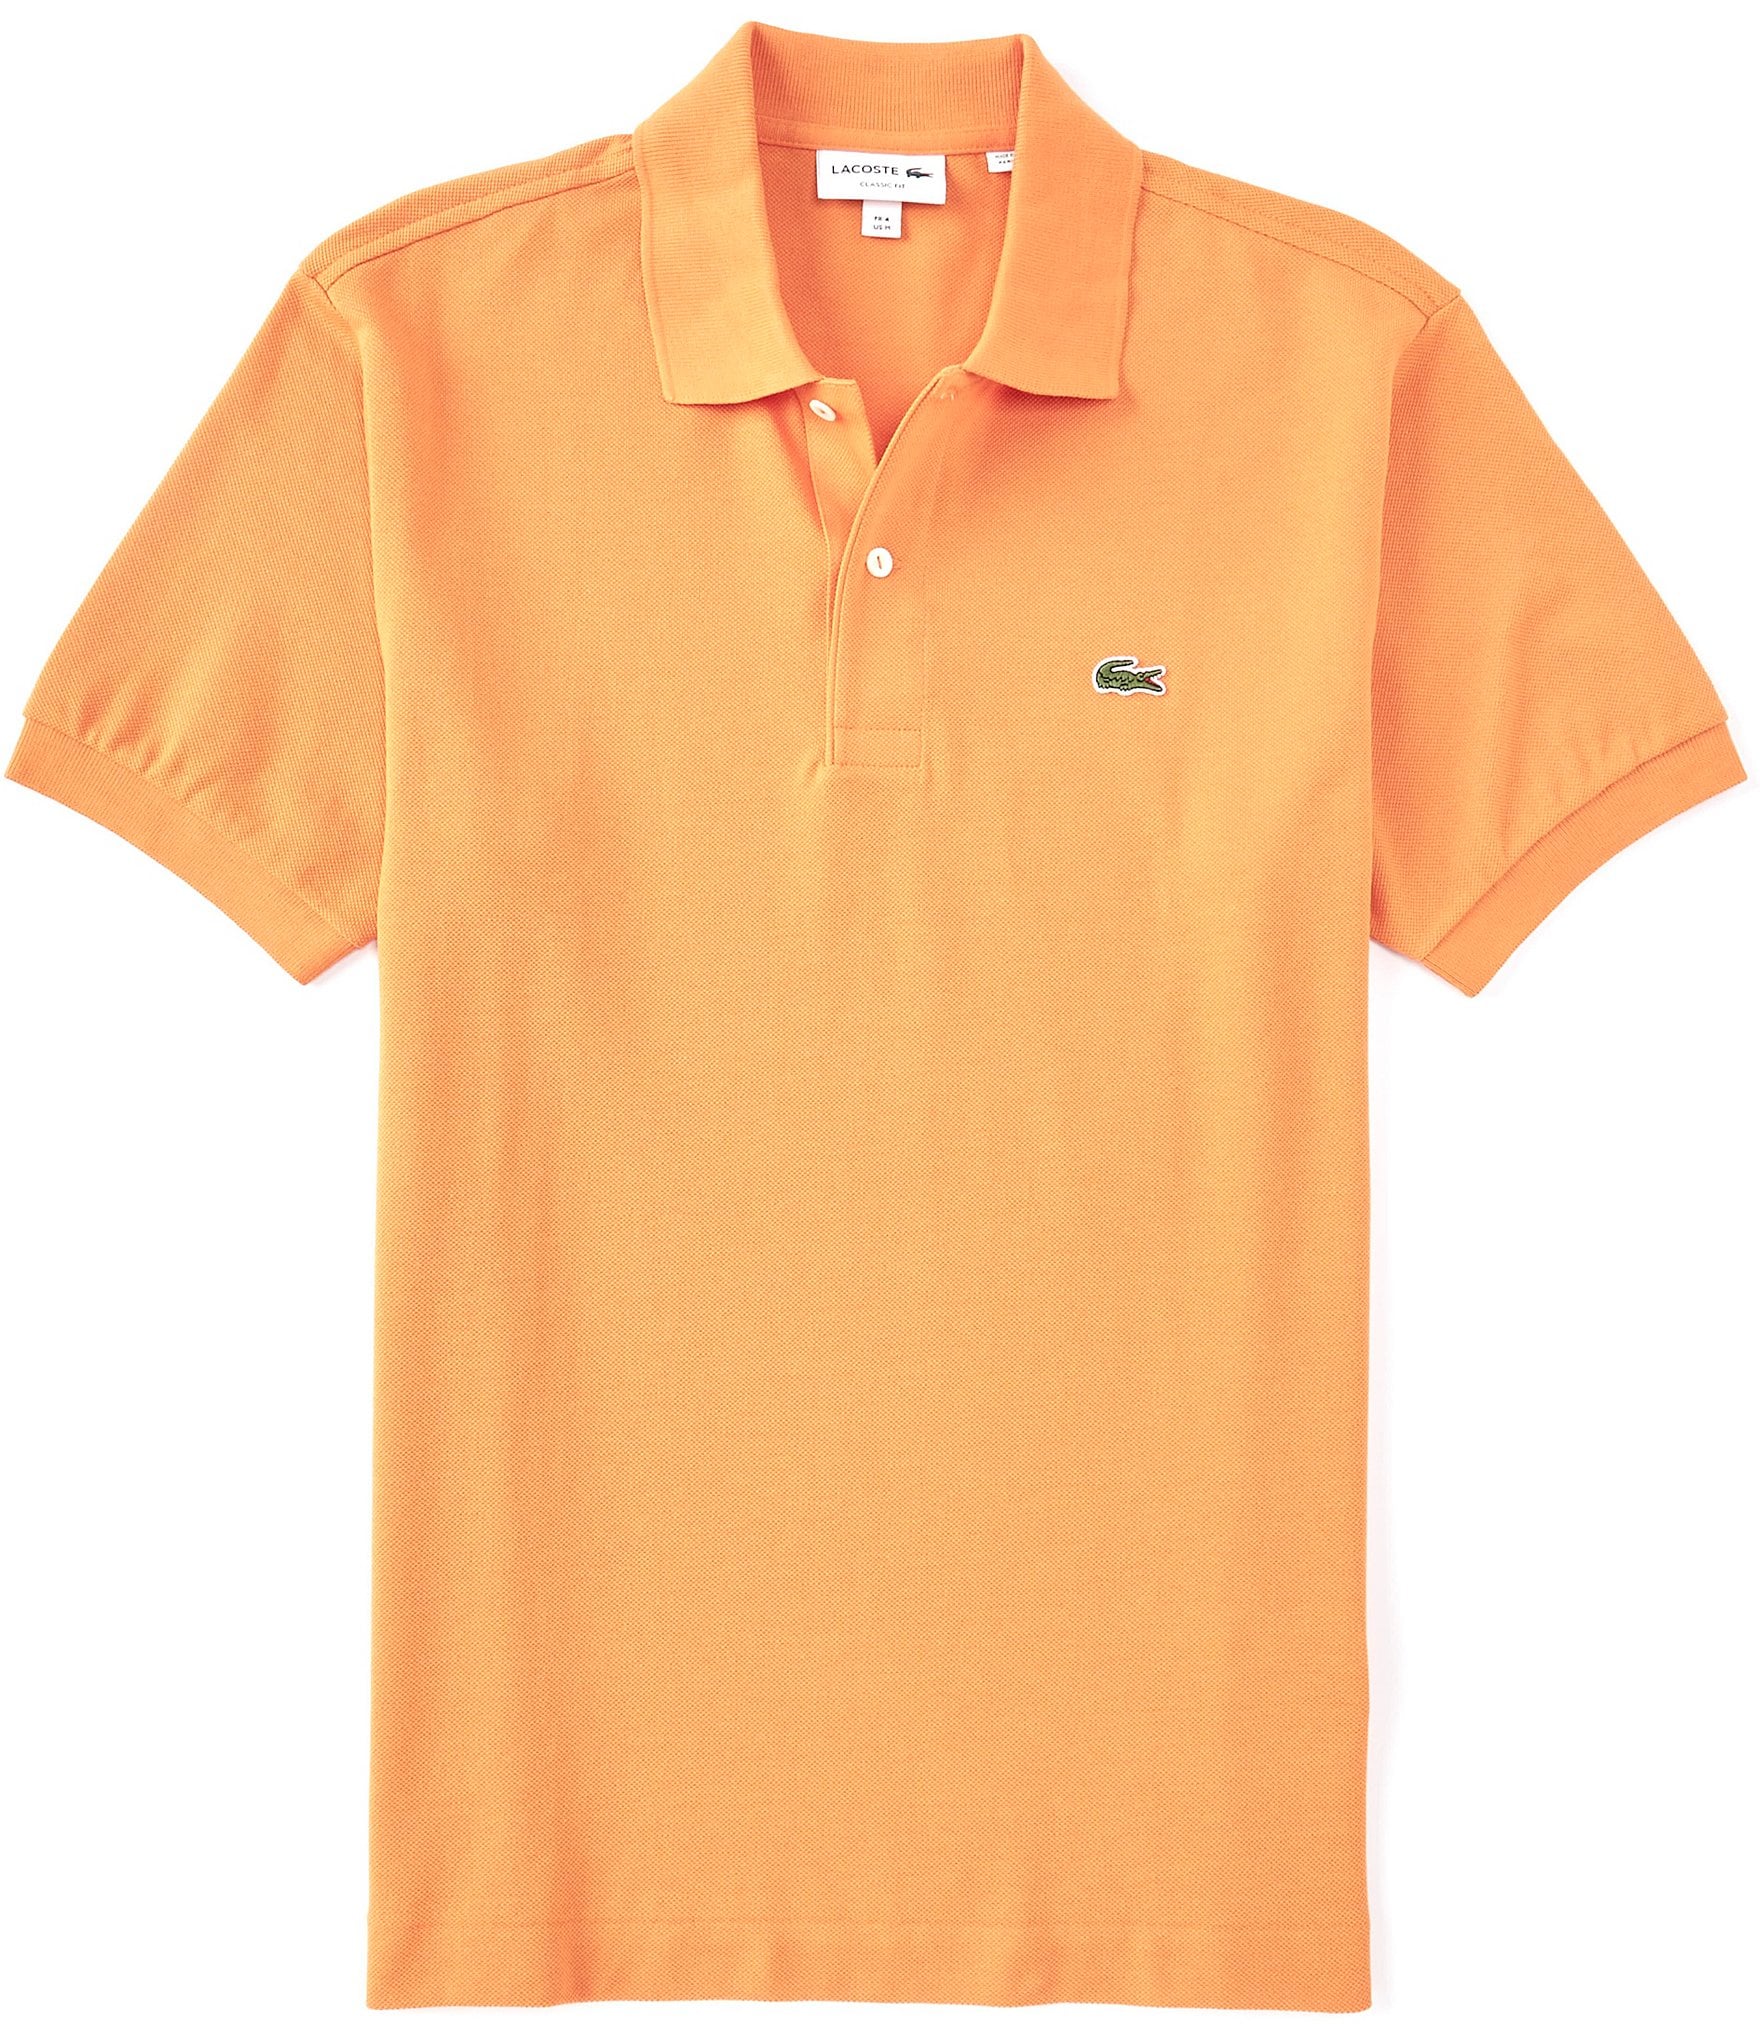 Lacoste & Classic Fit Solid Pique Short-Sleeve Polo Shirt | Dillard's